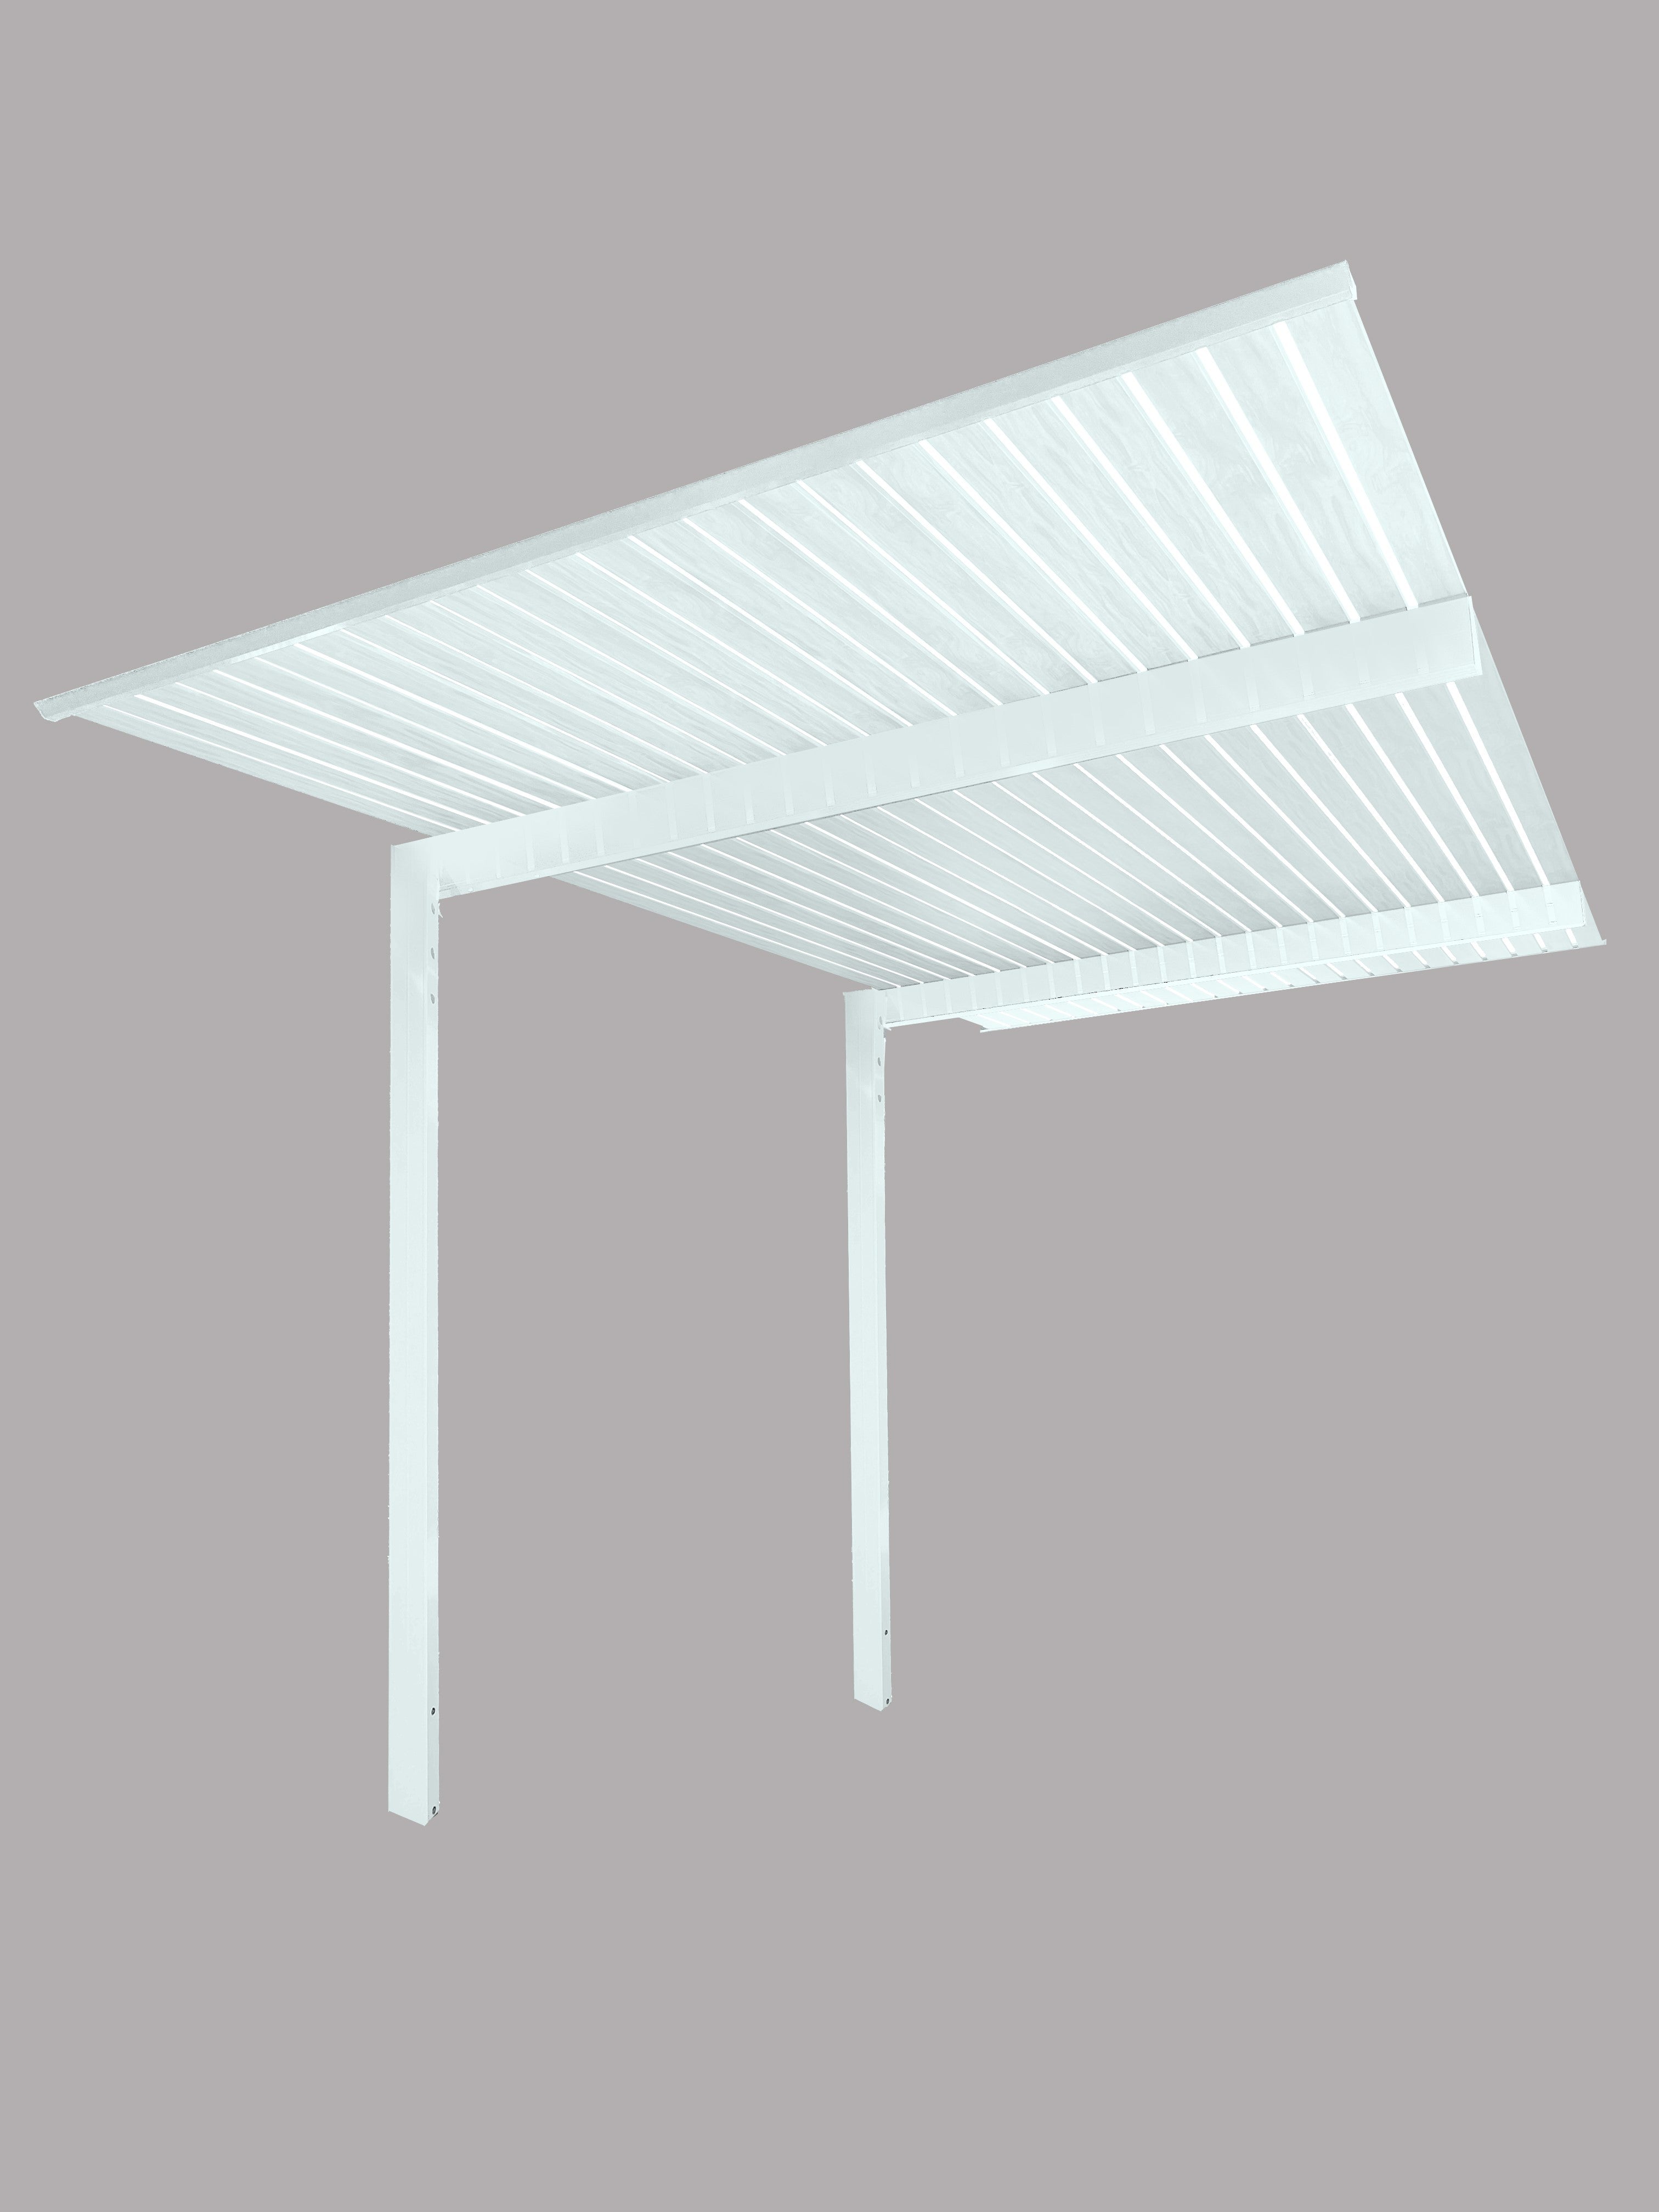 The Exclusive Cantilevered Pergola Kit - White 3.2x3m